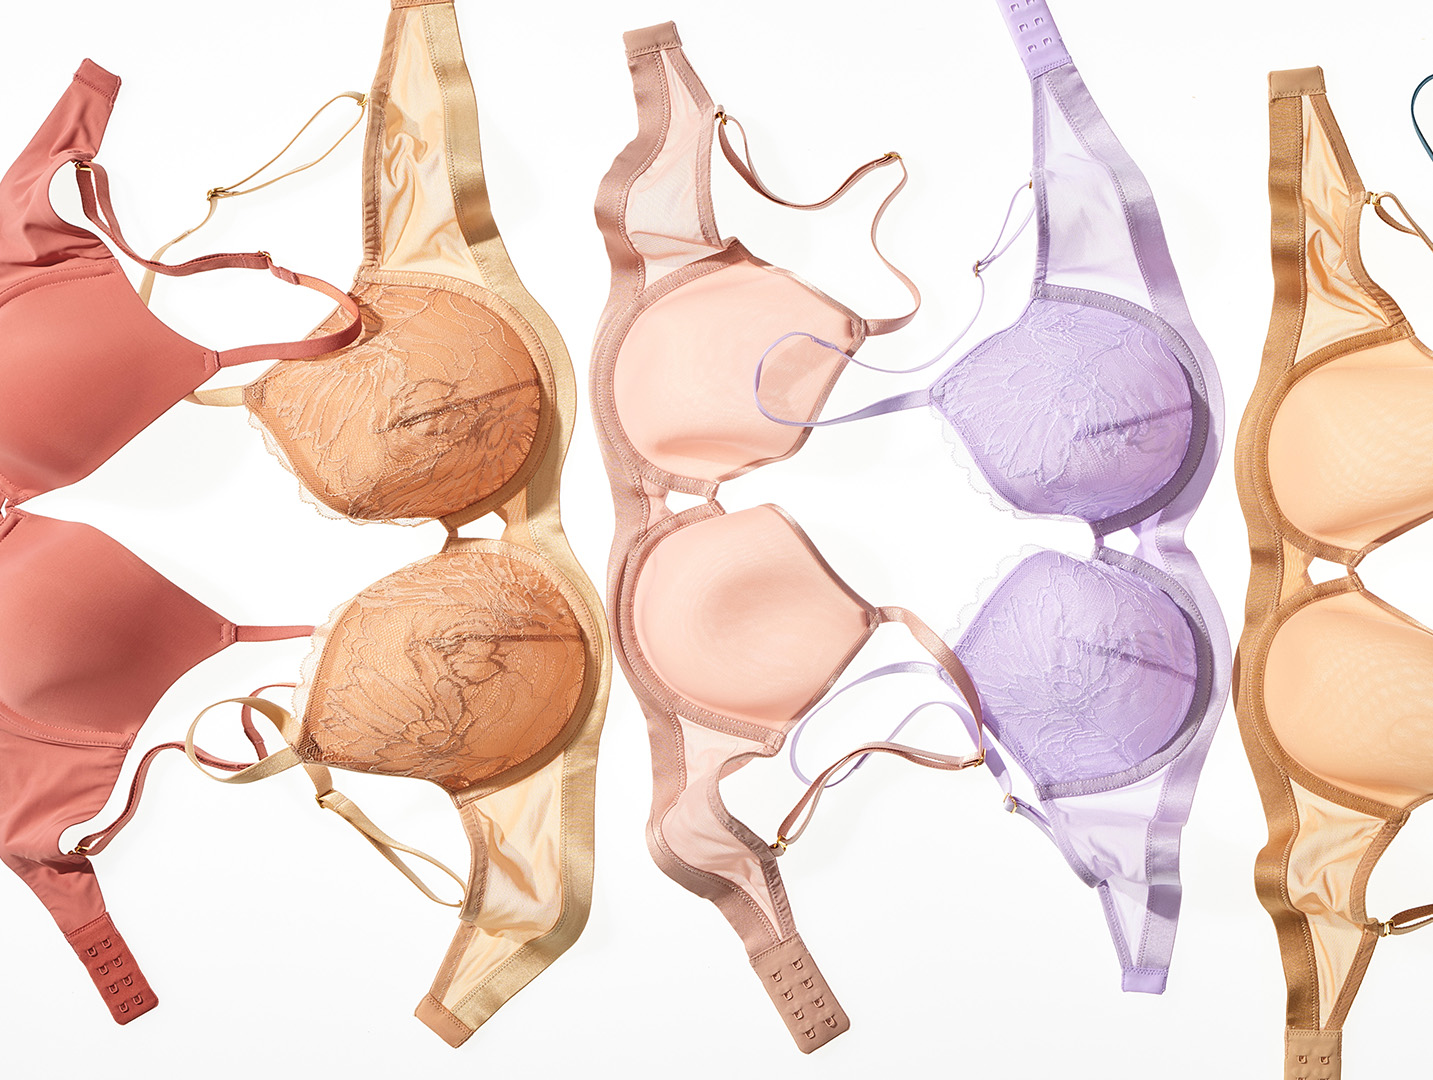 The SOMA Hookup Blog - Lined vs. Unlined Bras: What's the